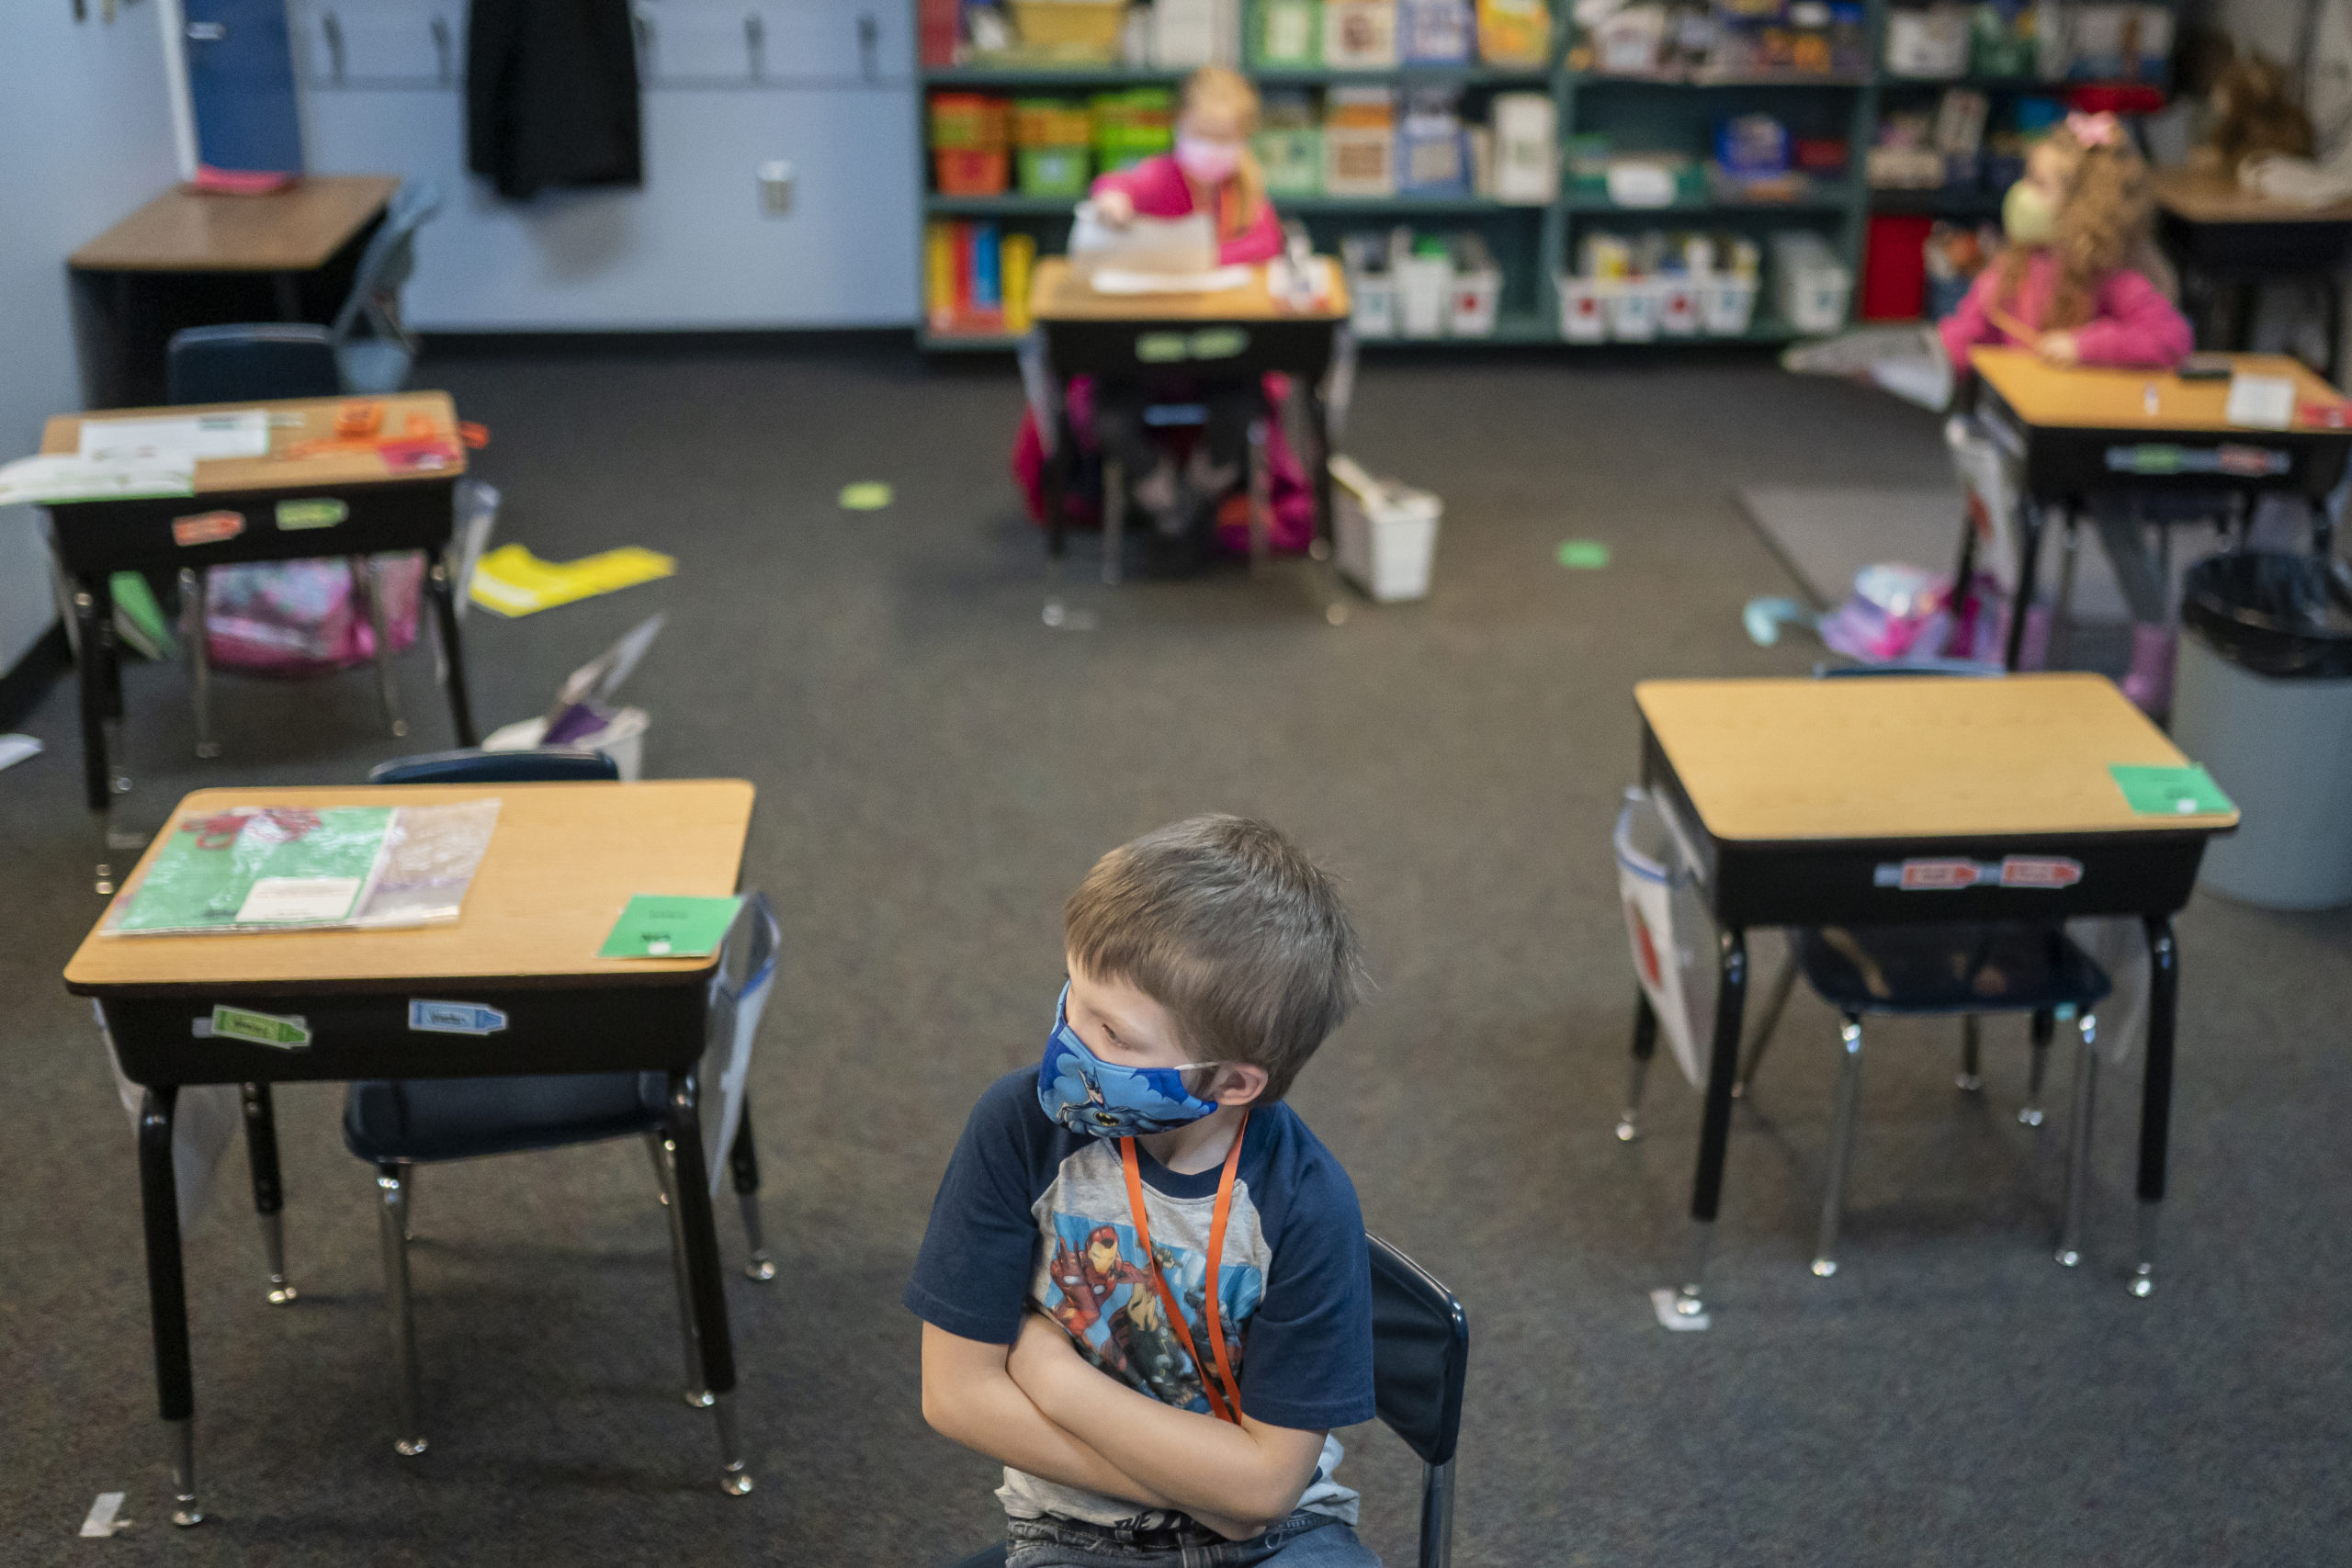 A first grade student at the Green Mountain School listens to his teacher on February 18, 2021 in Woodland, Washington. Washington state loosened in-person learning guidelines in December, sending elementary and middle school students back to the classroom a few days each week. (Photo by Nathan Howard/Getty Images)